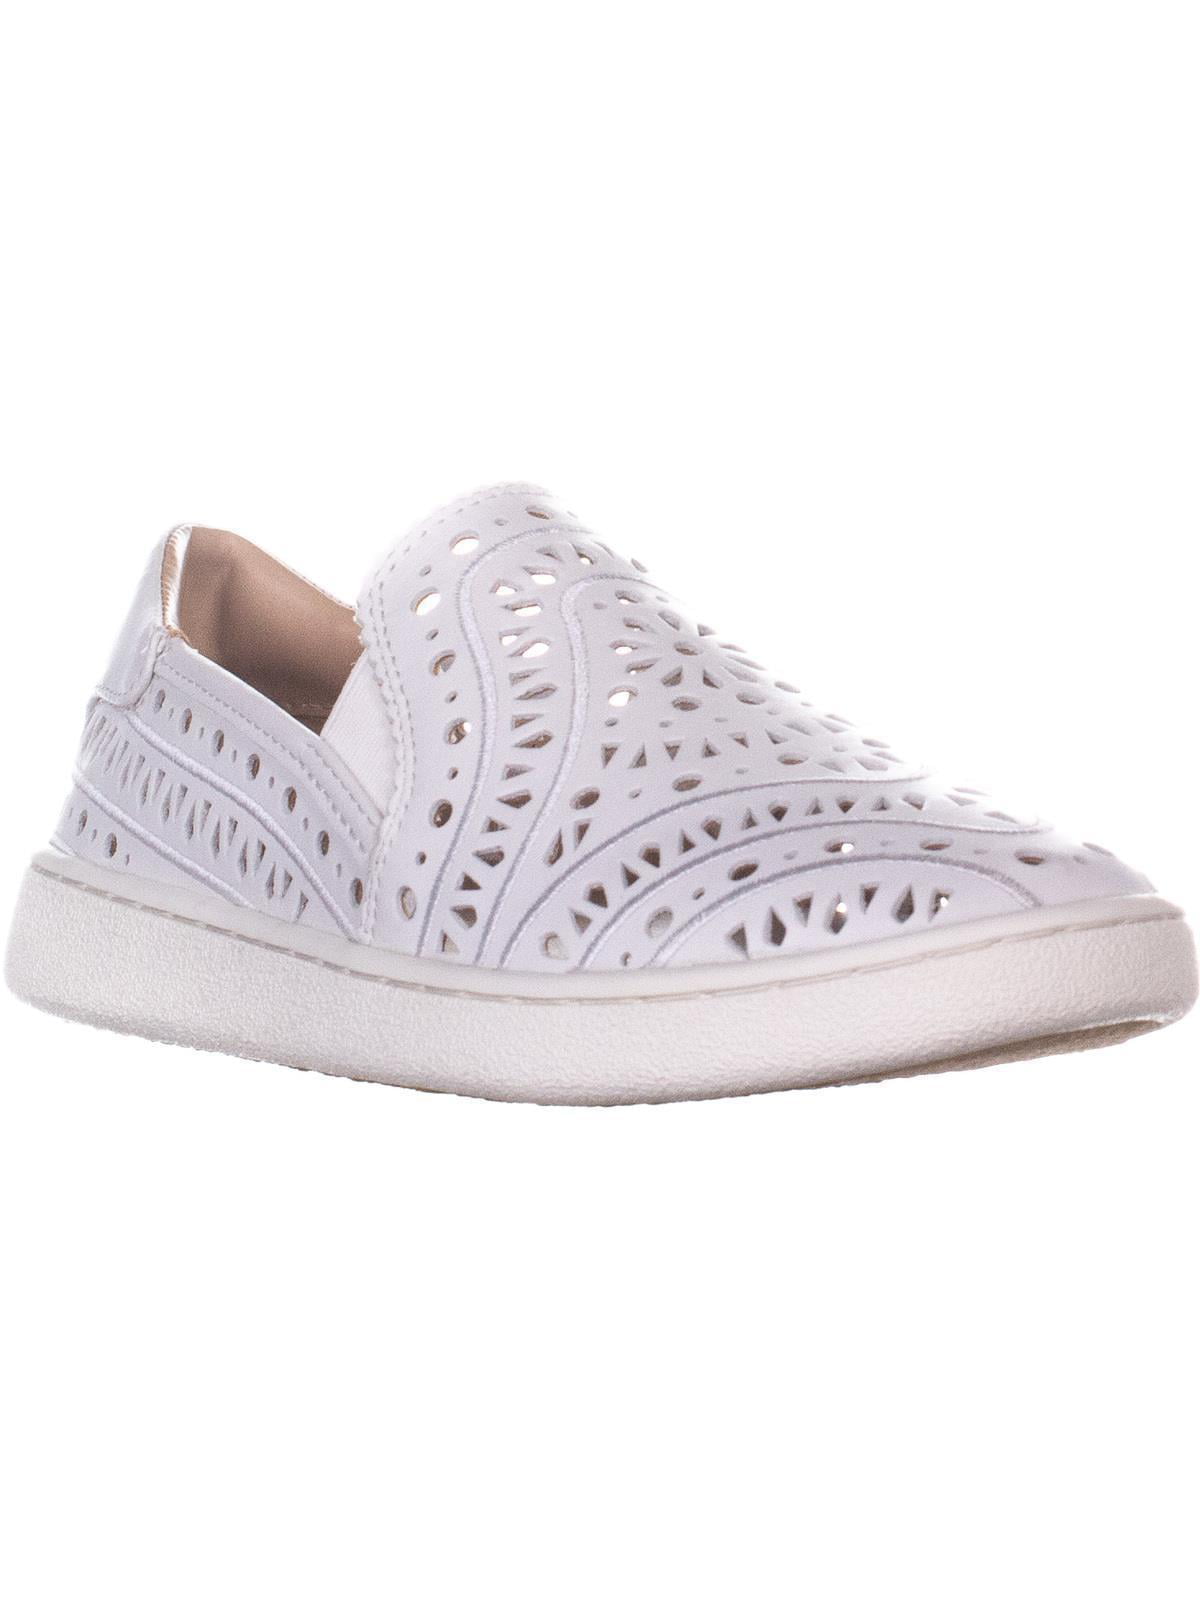 UGG - Womens UGG Australia Cas Perforated Slip On Sneakers, White ...